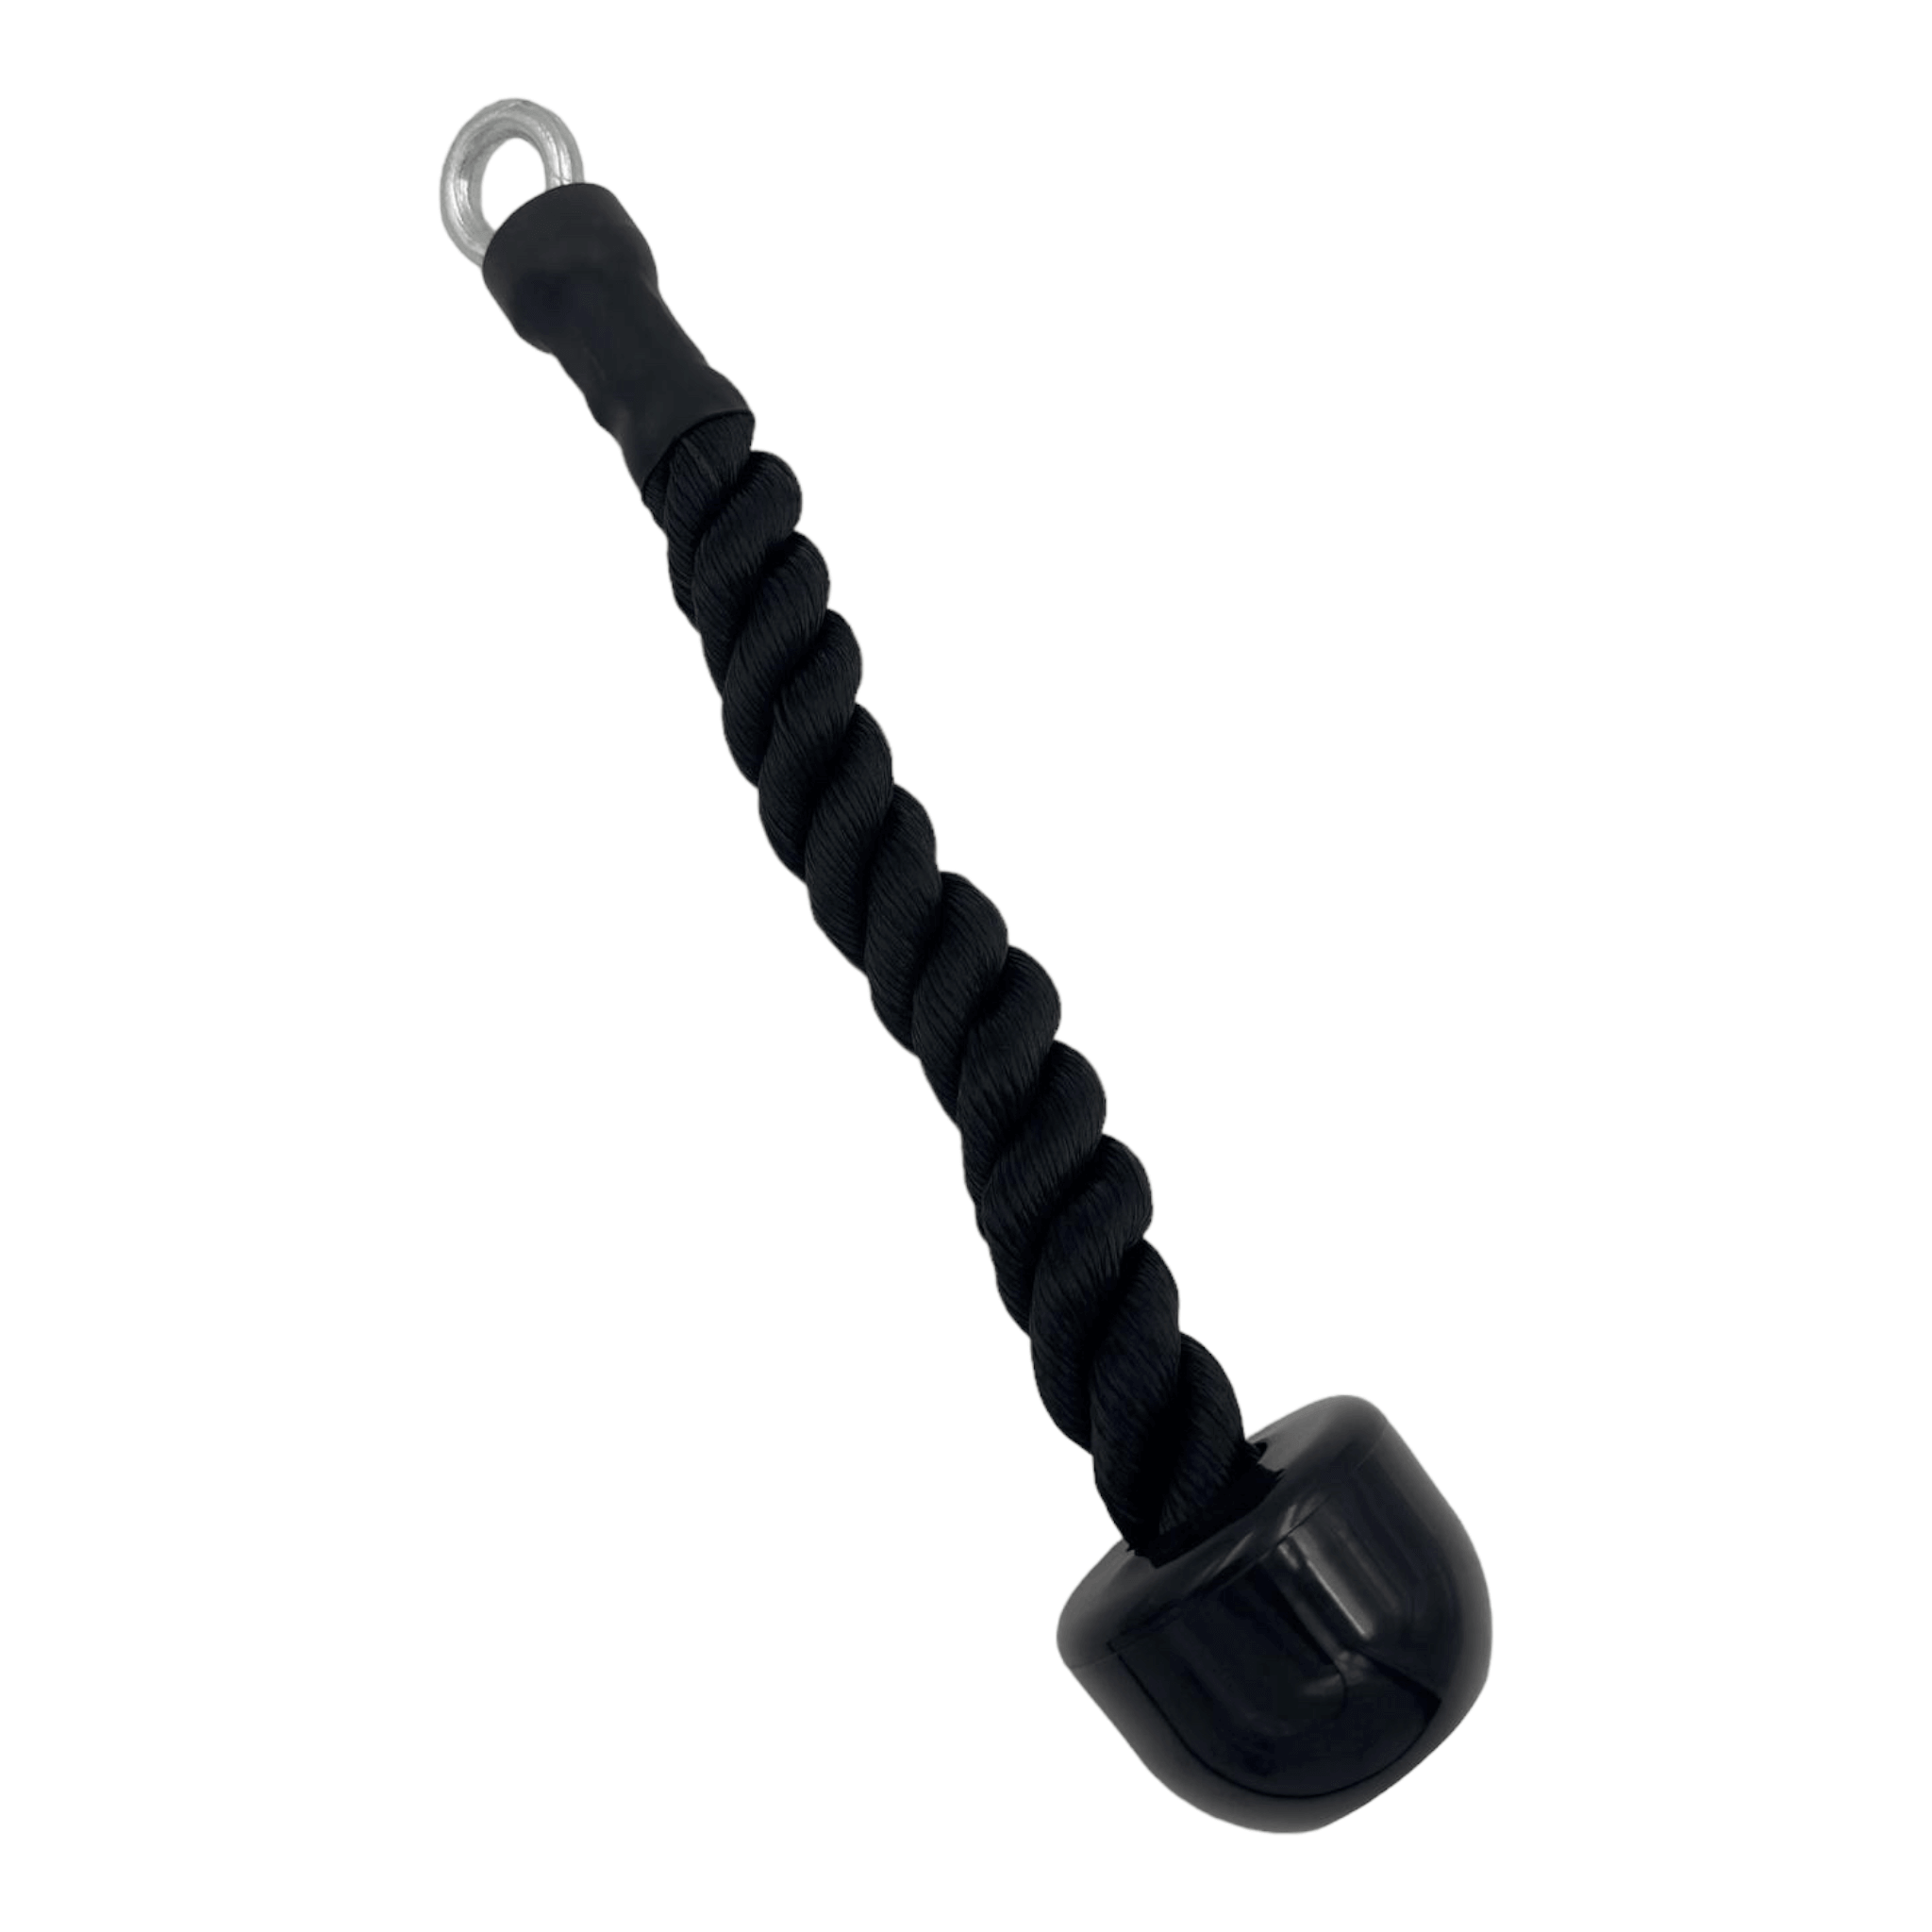 35cm Single Nylon Tricep Rope Cable Attachment | INSOURCE